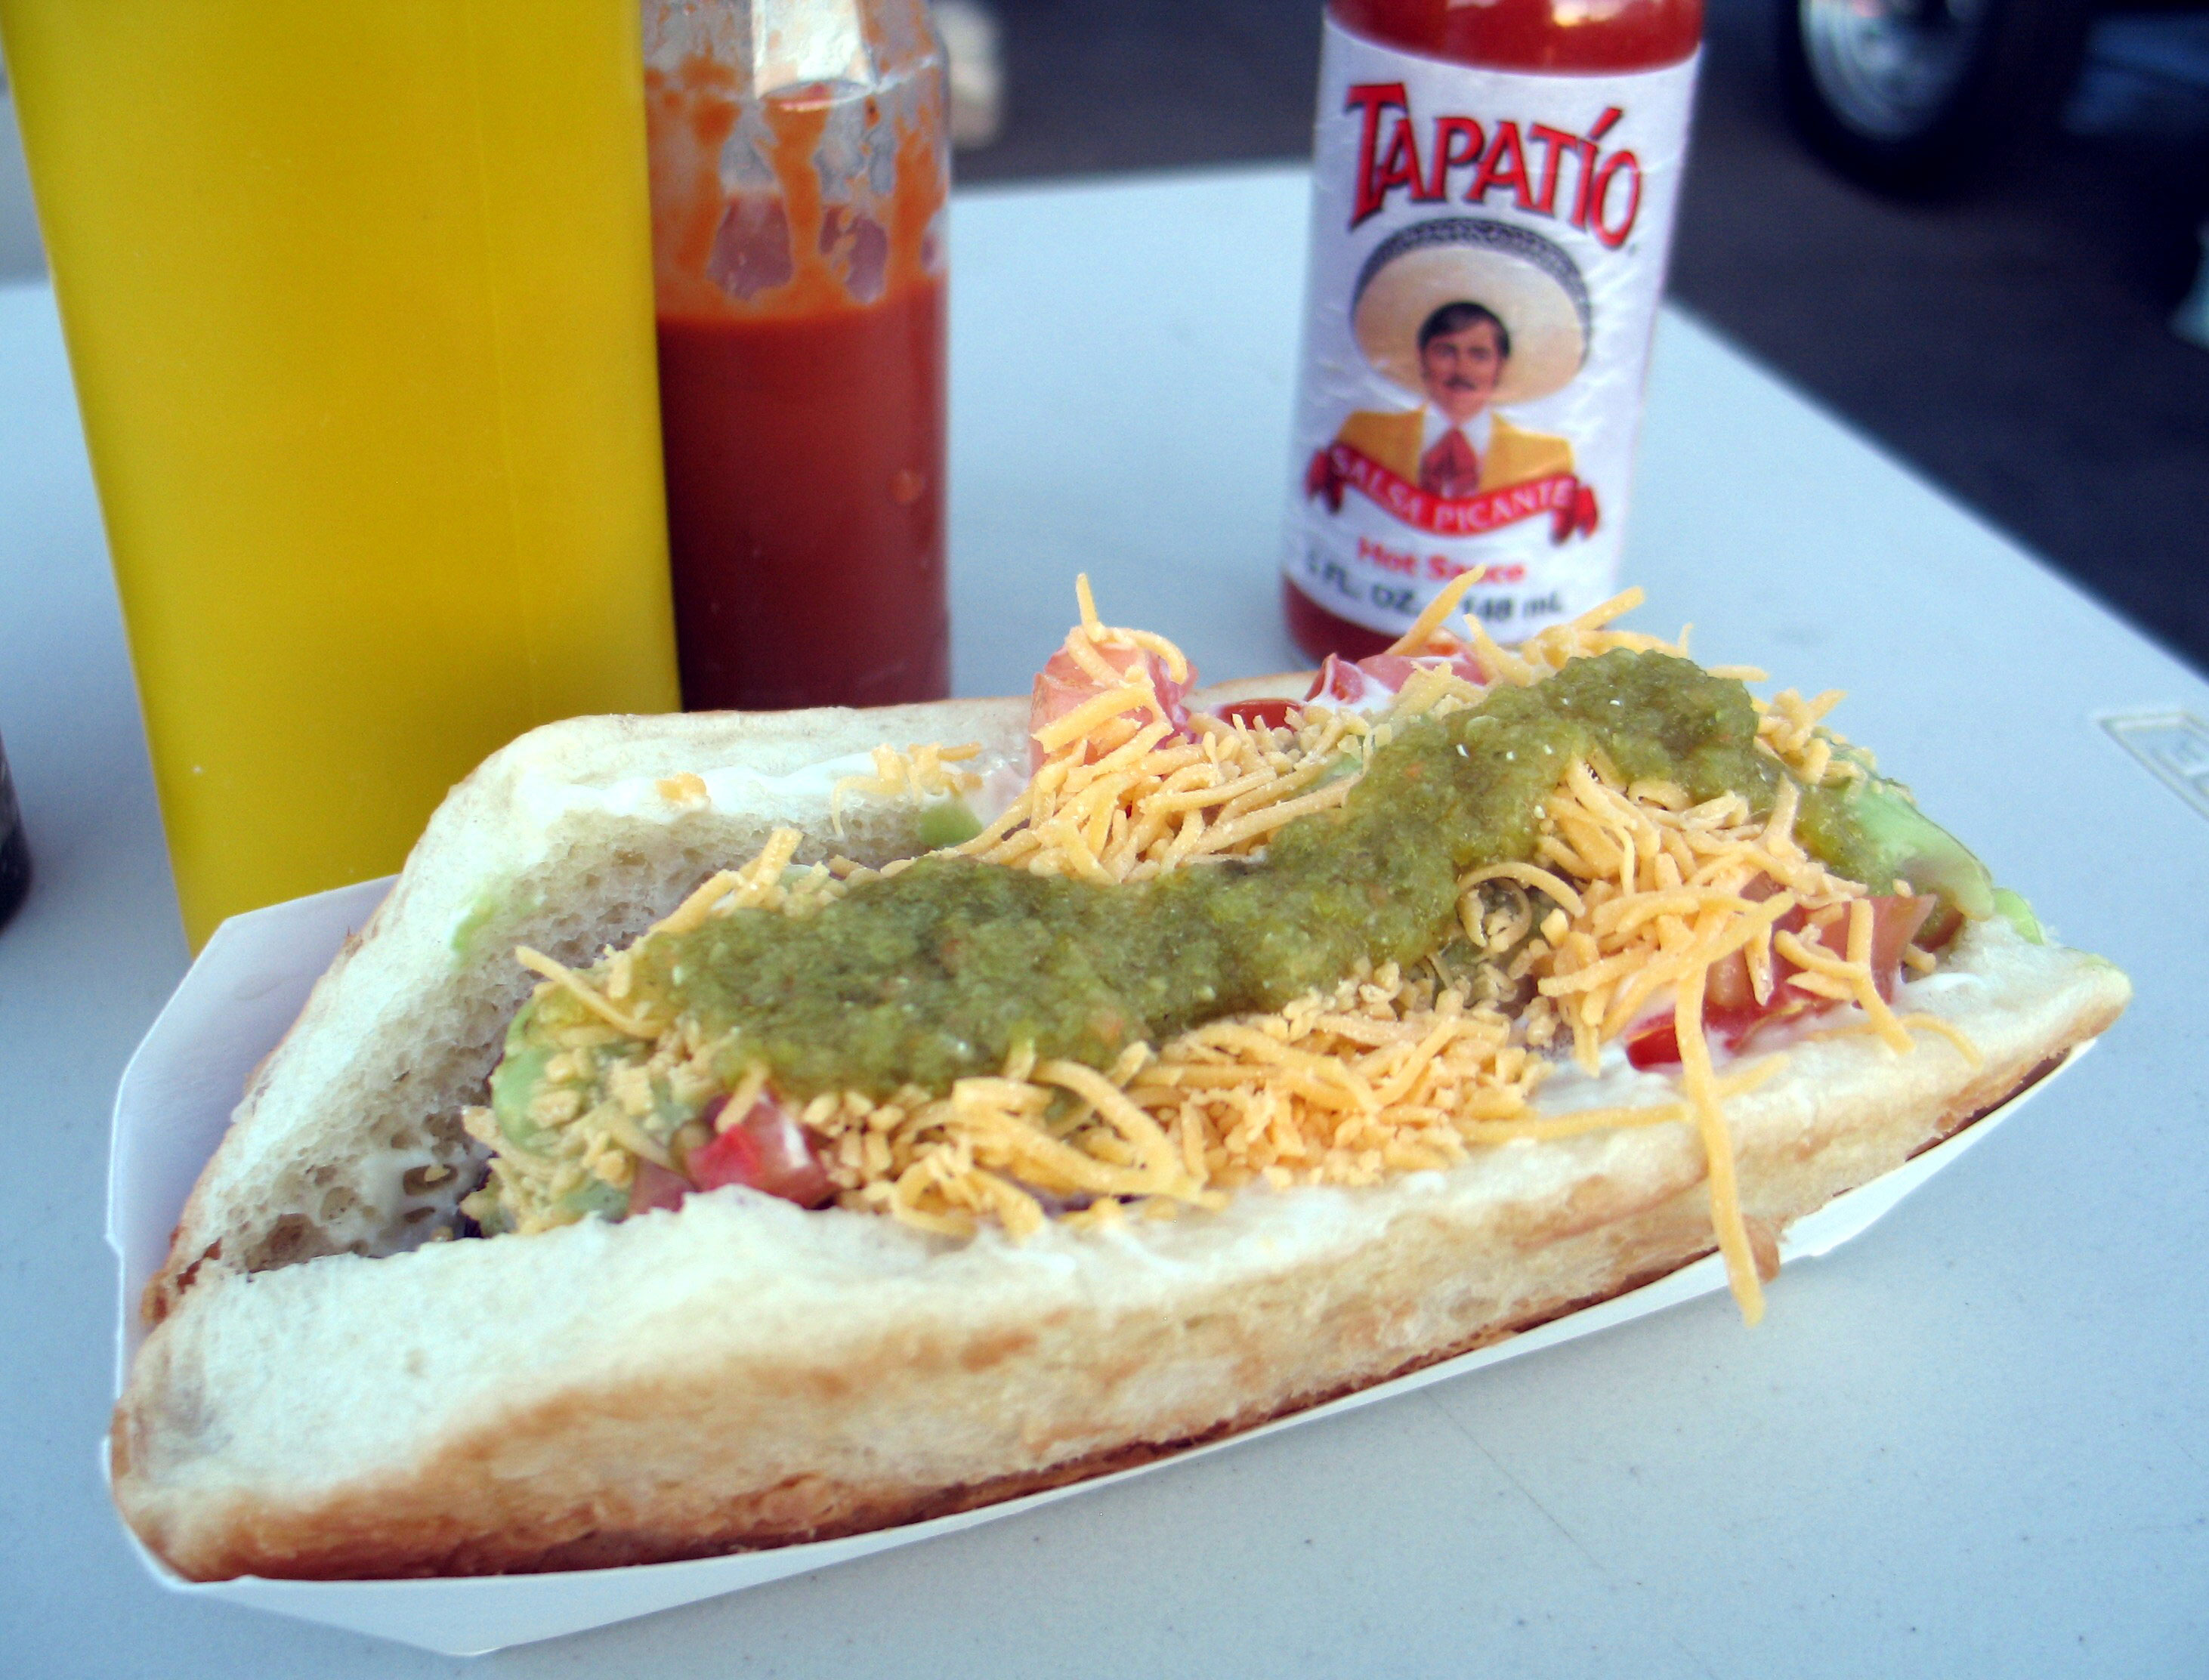 Traditional Brazilian Hot Dog in Closeup and Selective Focus